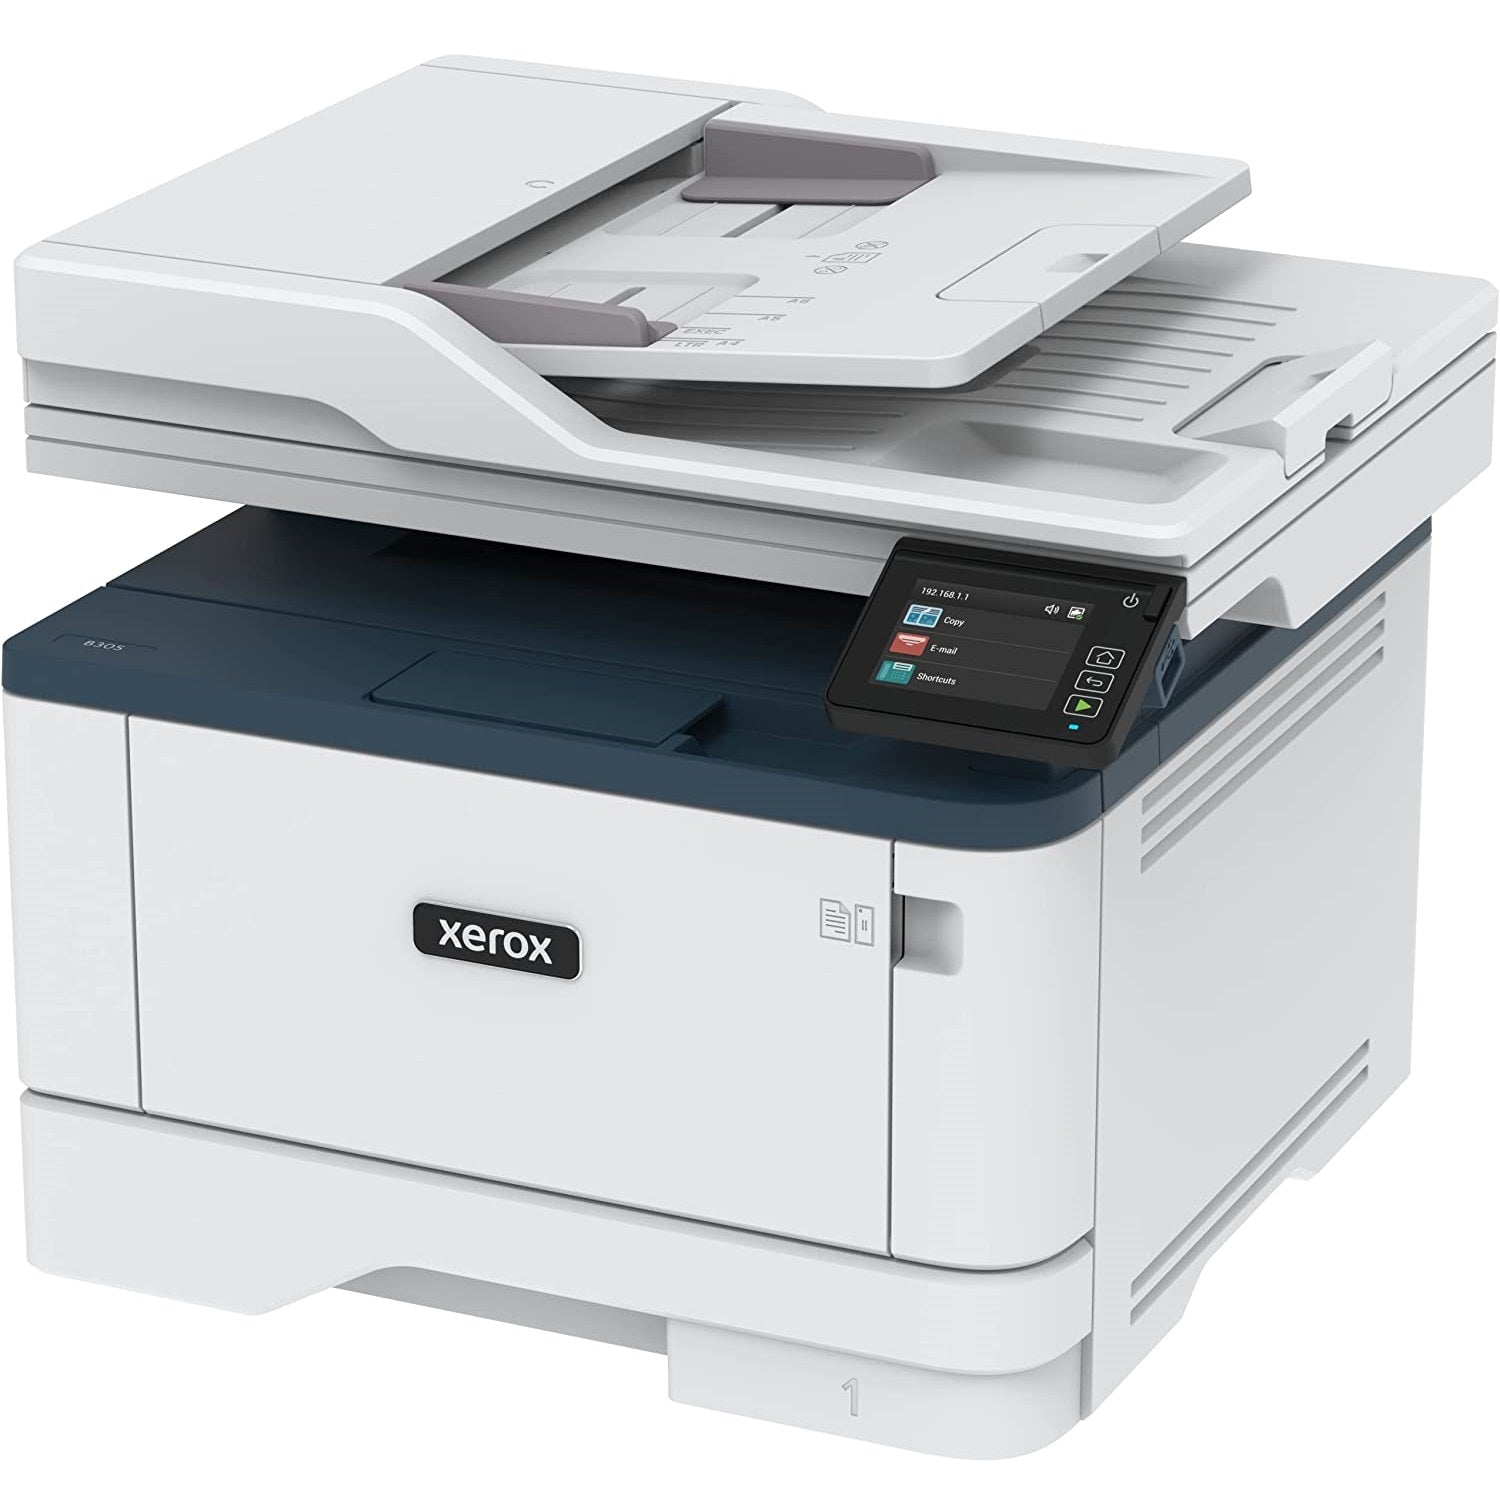 Xerox B315/DNI Wireless Black and White Laser Multifunction Printer, Print/Copy/Scan/Fax, Up To 42PPM, Letter/Legal - Capacity 350 Sheets